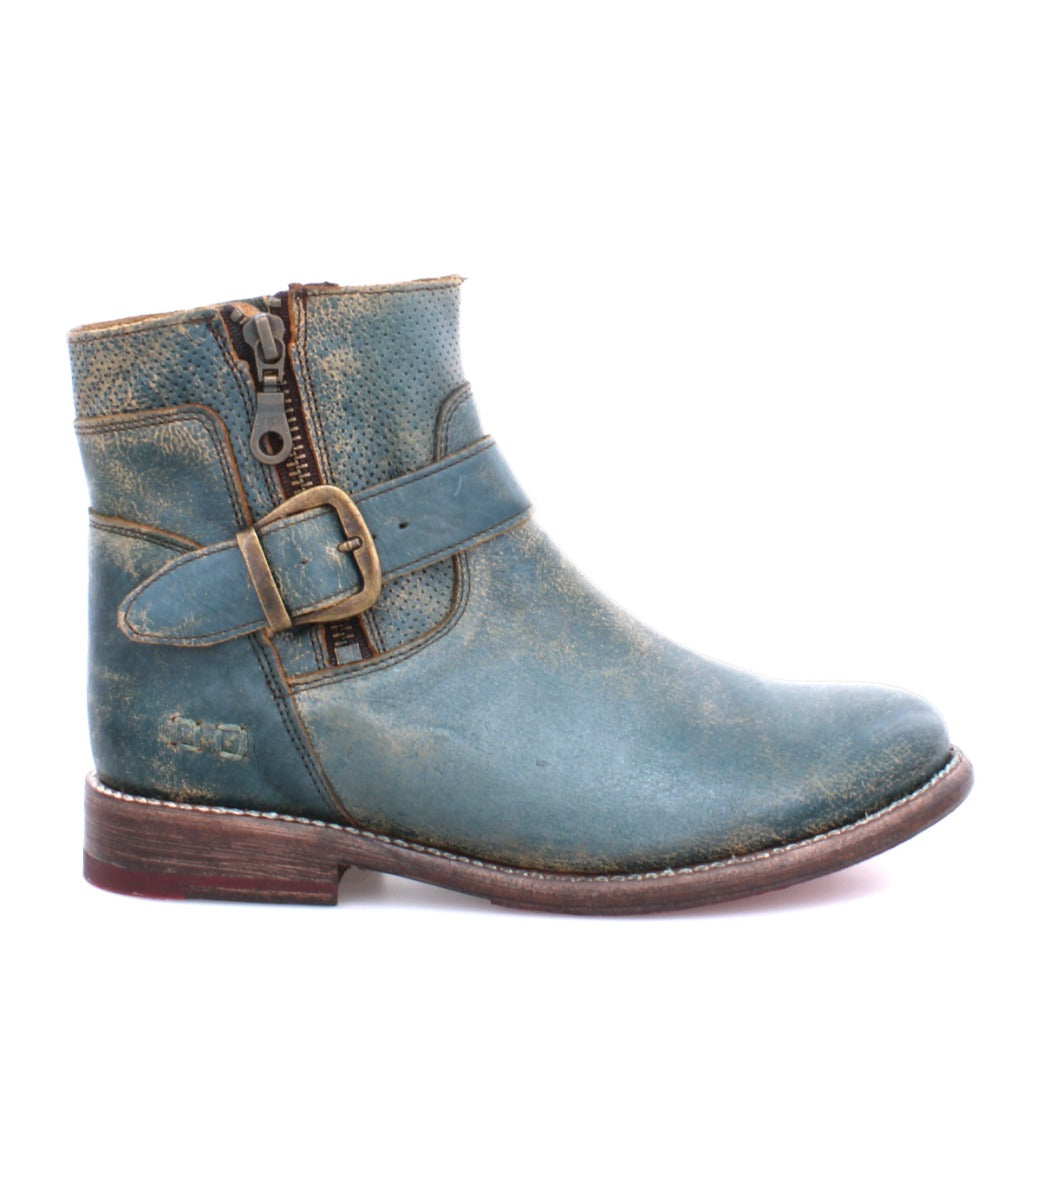 A women's teal leather Becca ankle boot with buckles by Bed Stu.